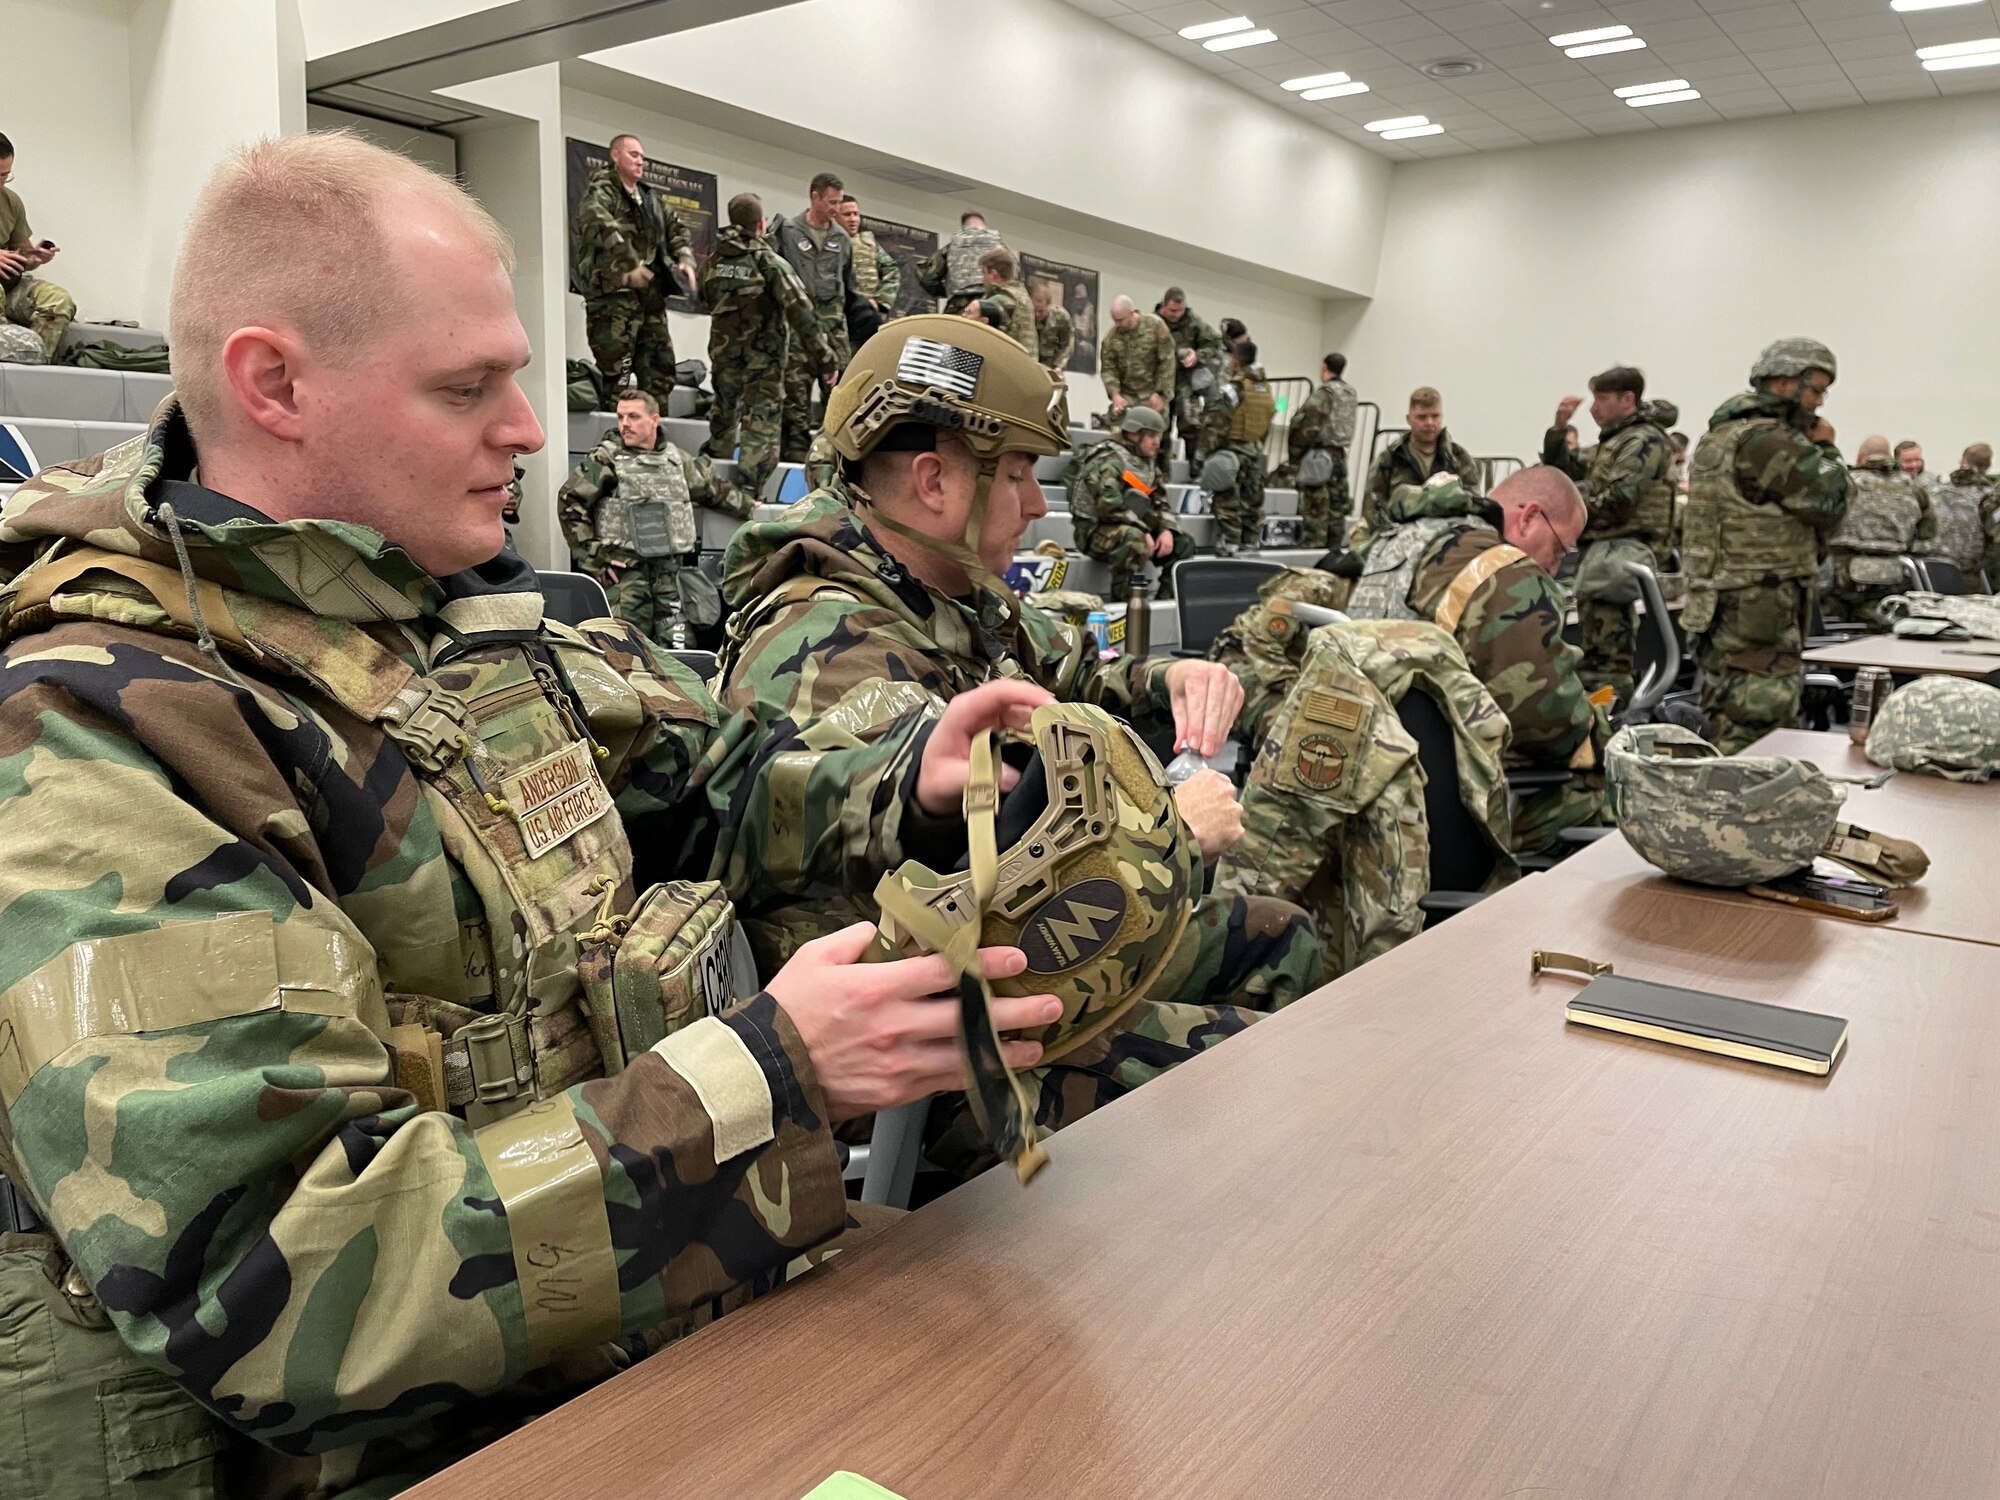 Dozens of soldiers work on dressing in protective gear in a conference room